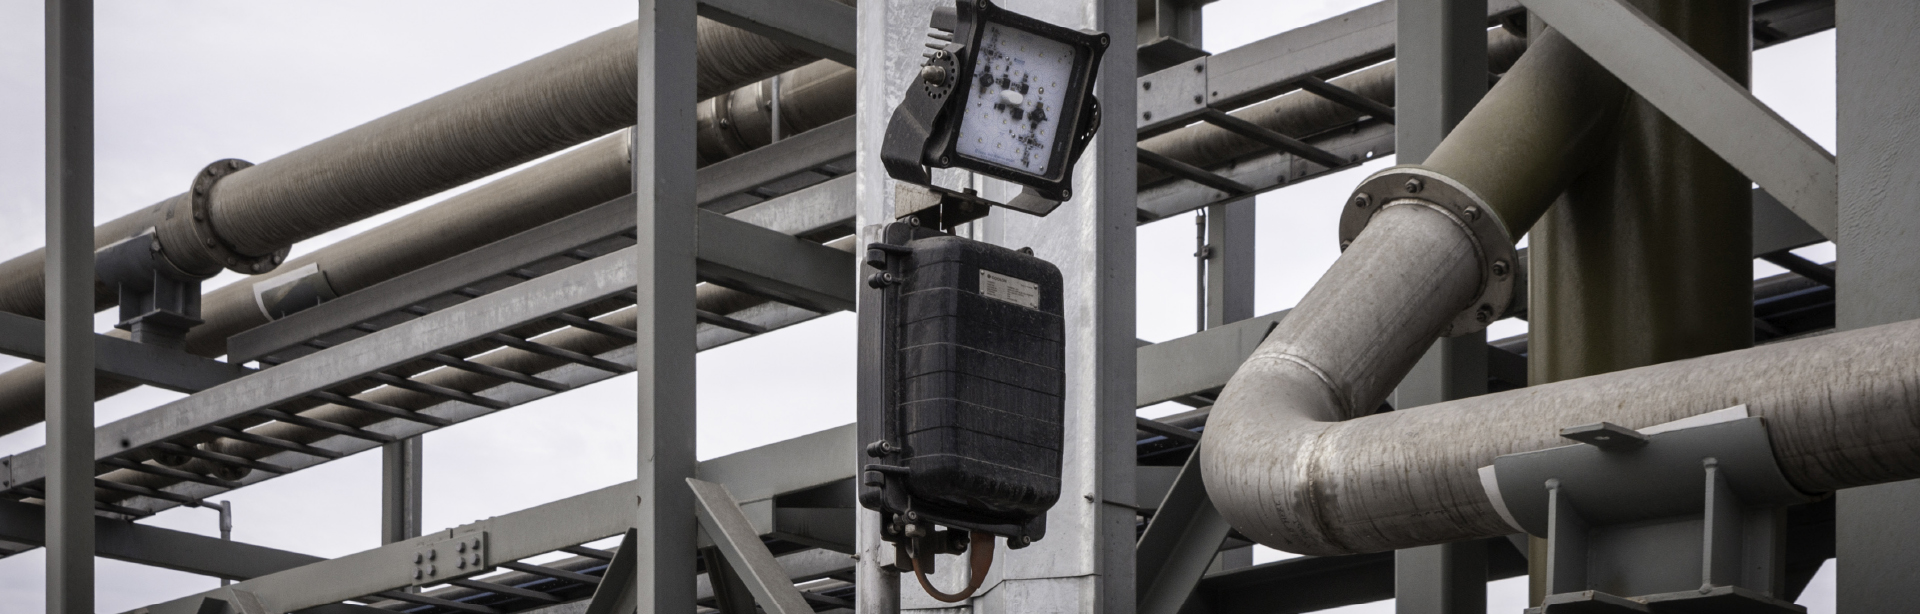 The U-Bolt Pole Mount allows a variety of surface mounted products to be installed on industrial poles, pipes and handrails of various diameters.